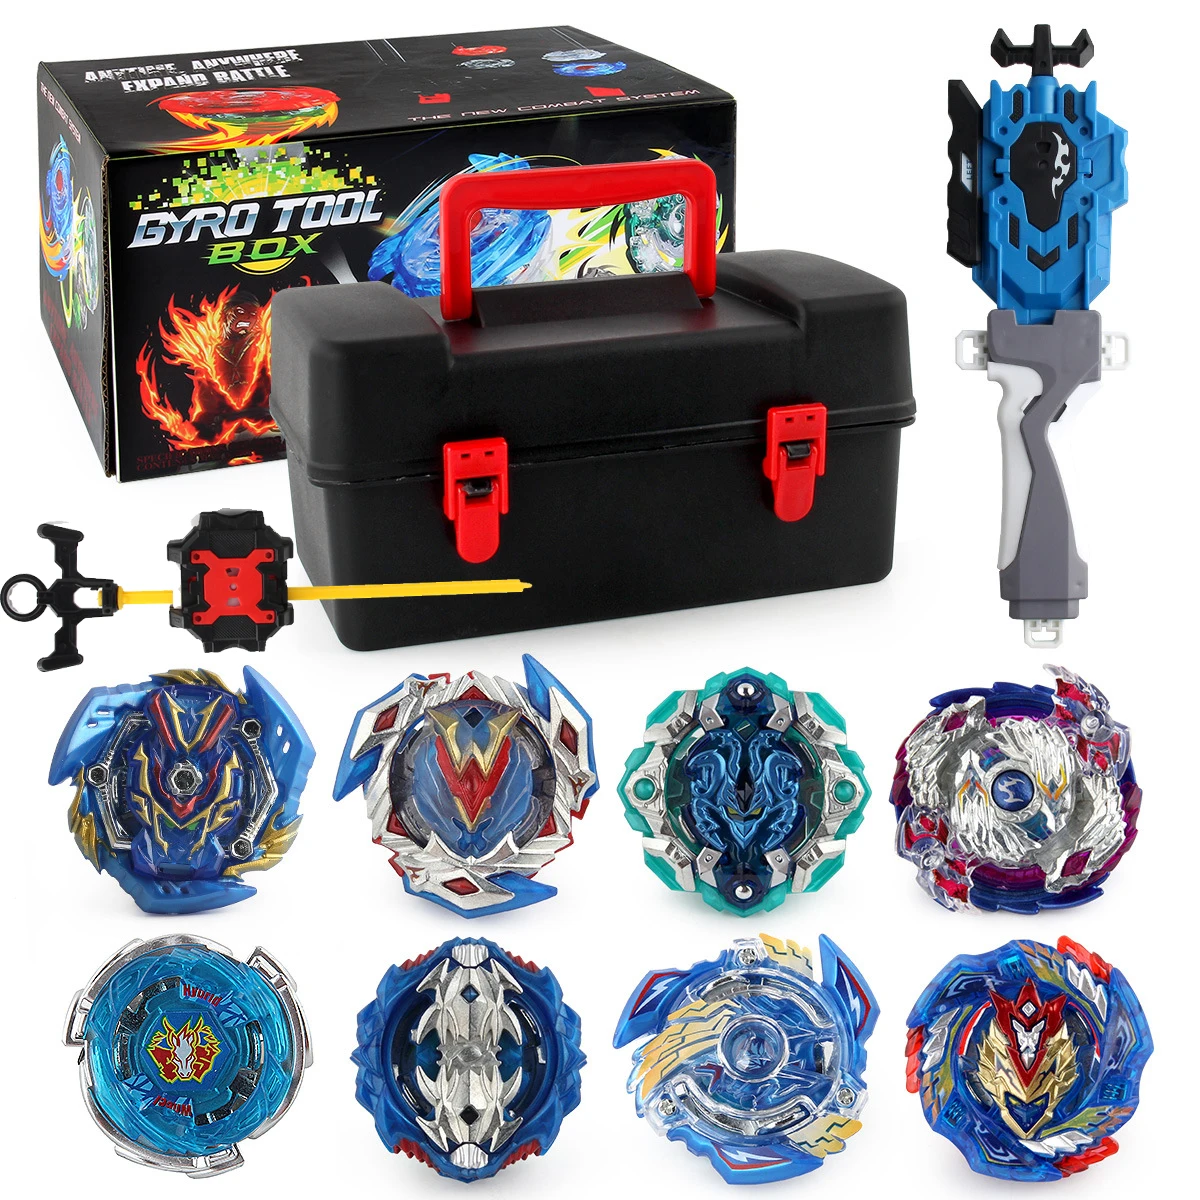 

Toupie Beyblades Burst Set Metal Fusion Top Spinning 8 Pcs Gyros with Tool Box and Launcher Handlebar Toys for Children